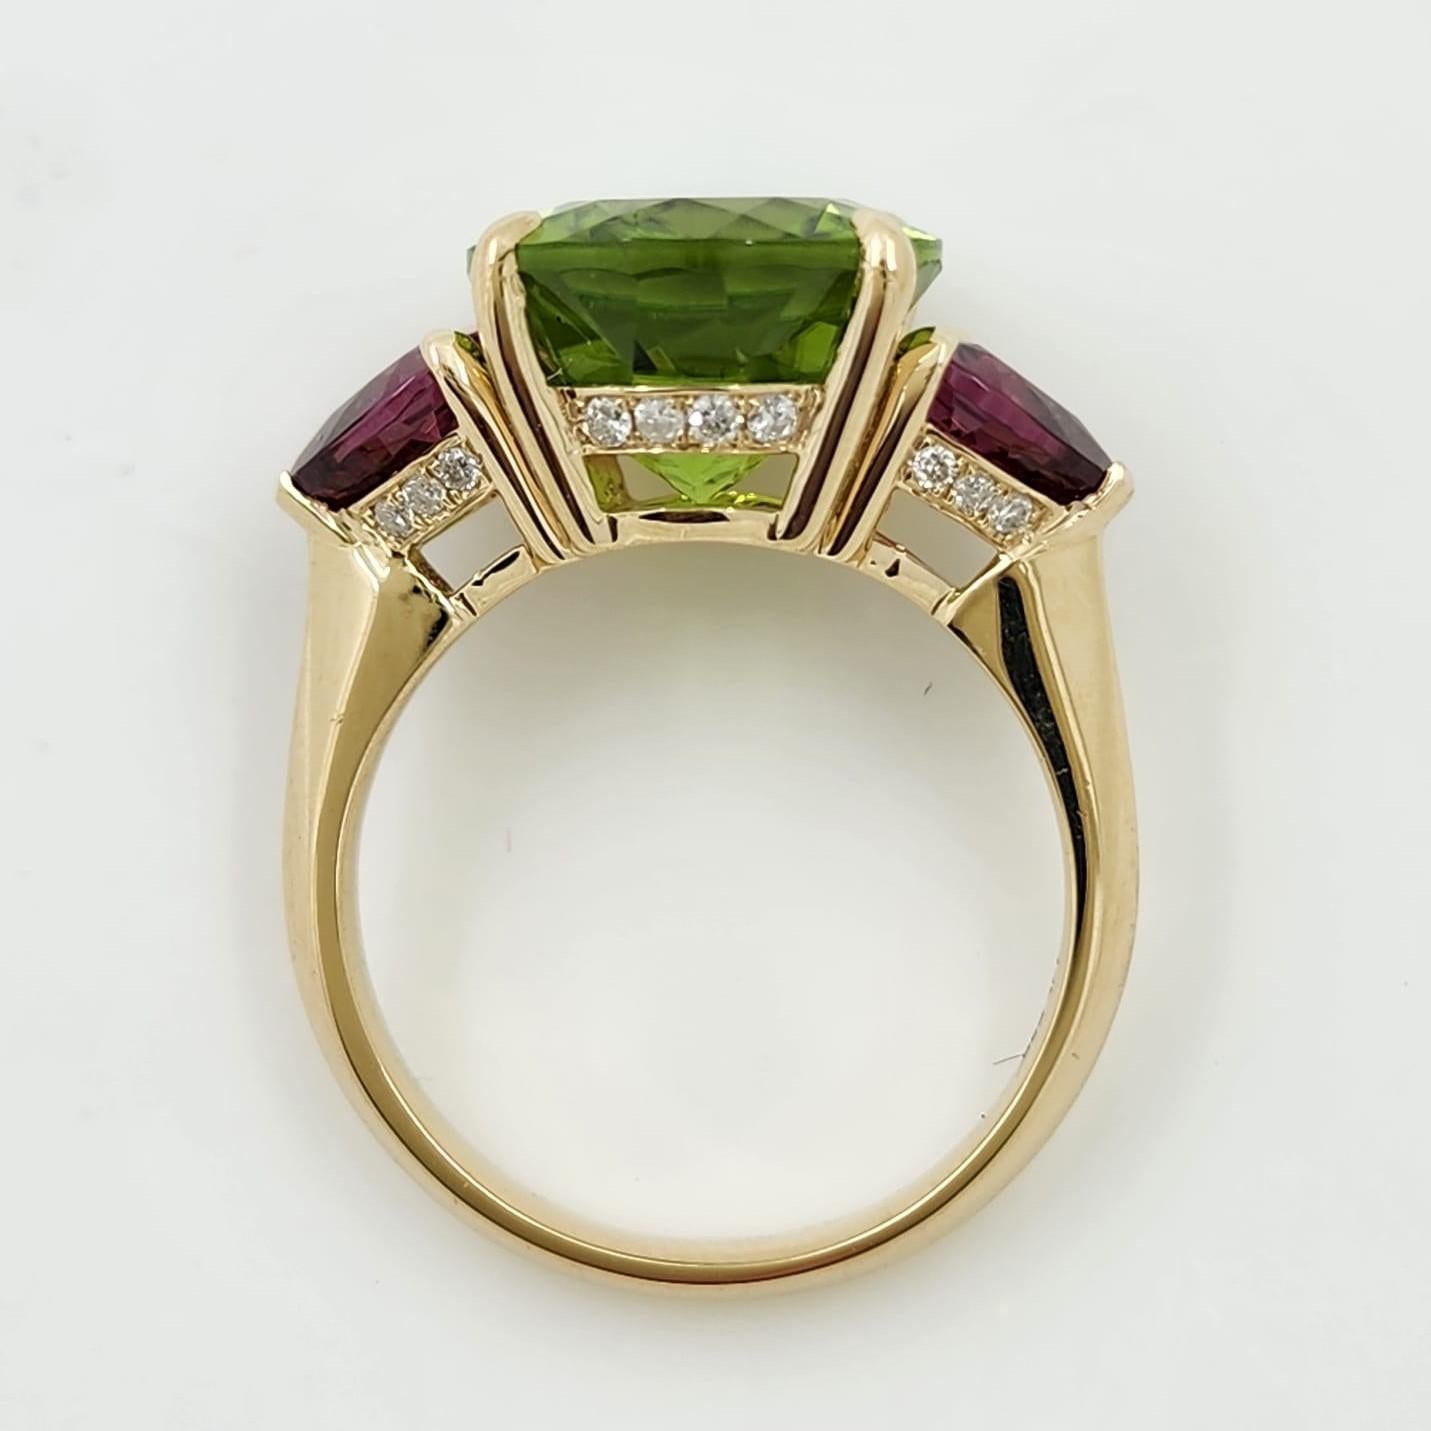 7.08Ct Peridot 1.97Ct Garnet and Diamond Ring in 14 Karat Yellow Gold In New Condition For Sale In Hong Kong, HK